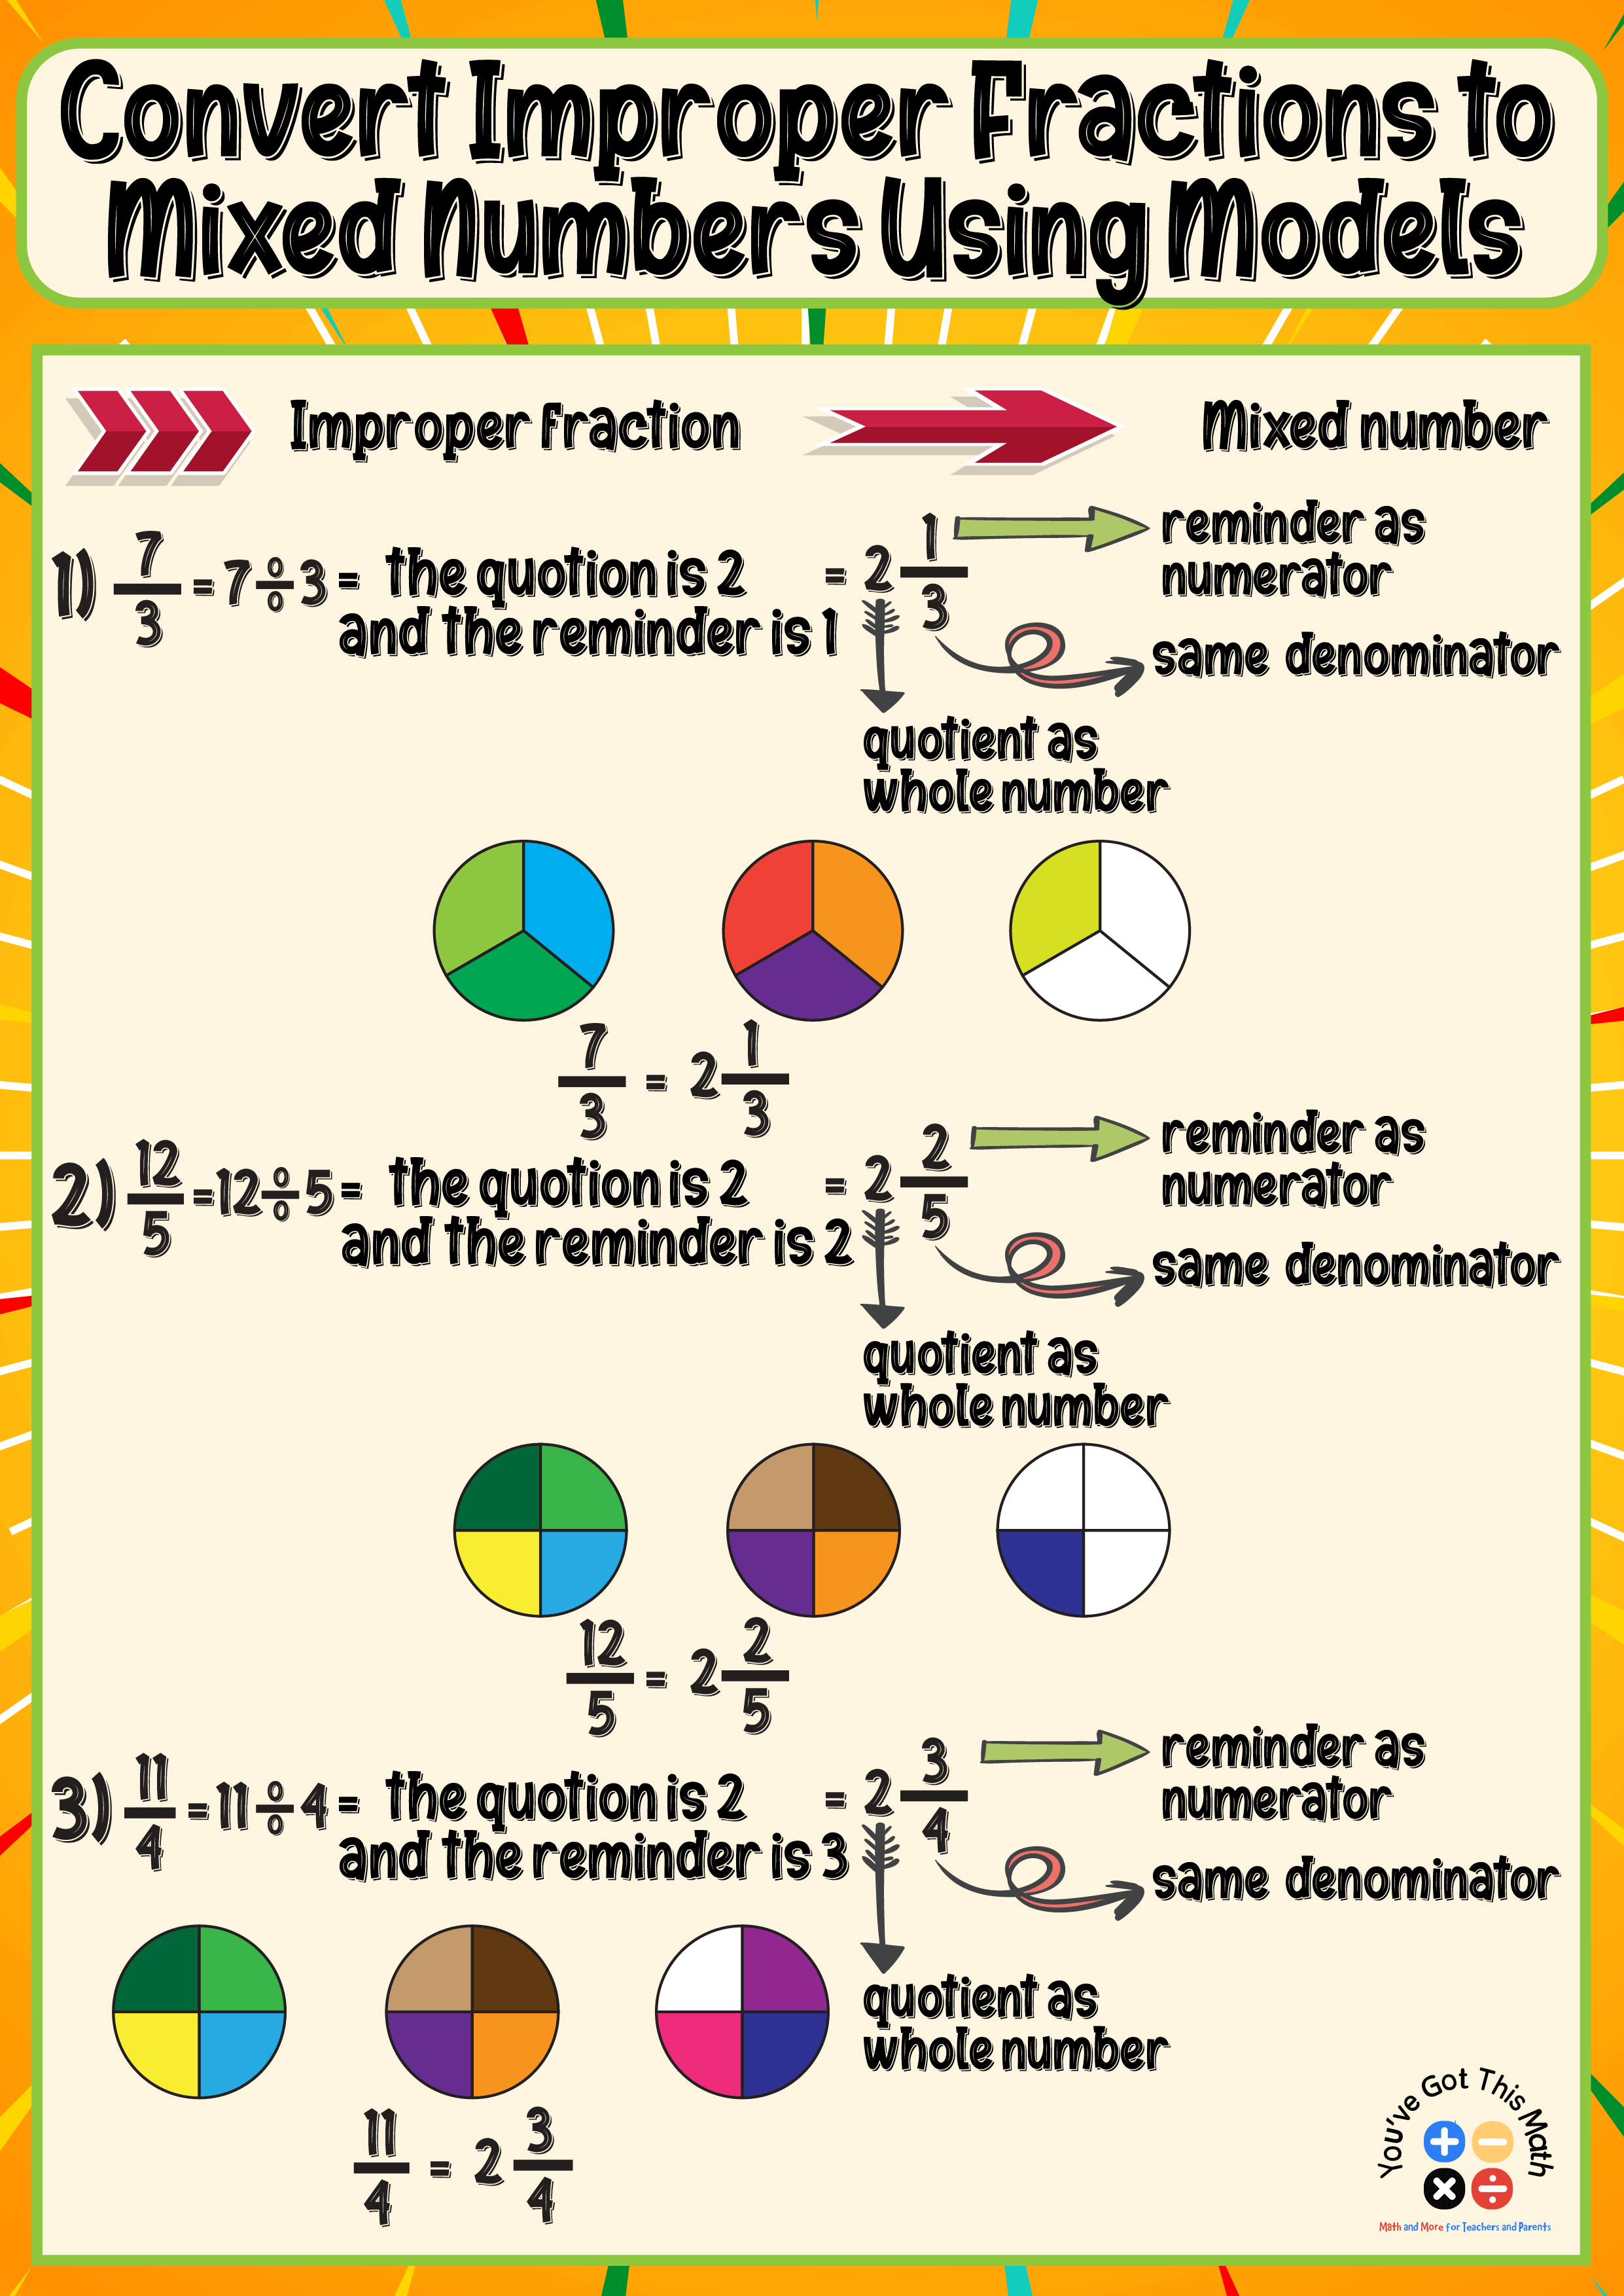 Using models to convert improper fractions to mixed numbers